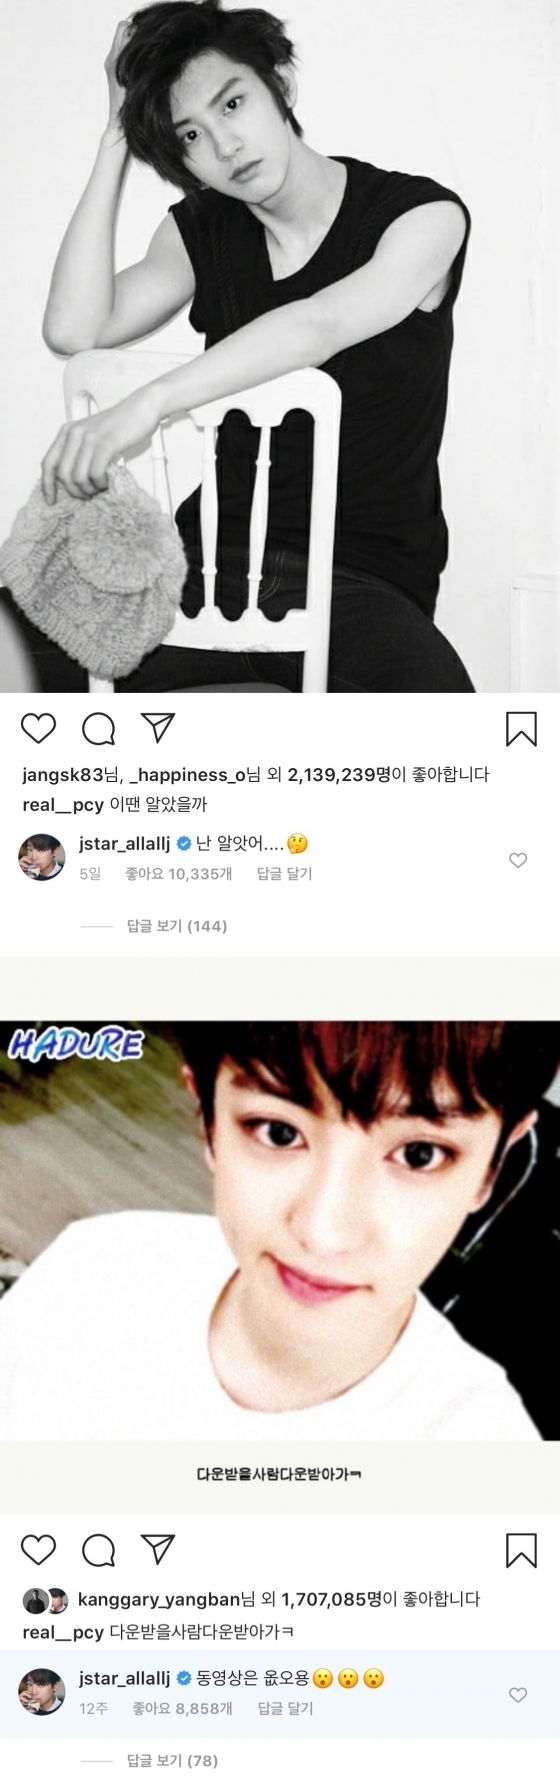 Actor Jung Kyung-ho showed his love for EXO member Chanyeol and showed off his contacting aspect.Jung Kyung-ho attracted fans attention by posting a series of replies to the Instagram post posted by Chanyeol.When Chanyeol posted a picture of the past with the article Did you know this time on the 8th, Jung Kyung-ho wrote a faint reply saying I knew.Also, when Chanyeol posted a playful post with a picture of Haduri and Who will be Down, Jung Kyung-ho poured out his affection for Chanyeol, saying, The video is misuse.Jung Kyung-hos love of Chanyeol didnt end here.When Chanyeol wore Rudolphs headband for Christmas, he laughed with an extraordinary expression, If I had Rudolph like you, I would have become a Santa teacher.Chanyeol said, I lived hard and I am doing well, Chanyeol. Jung Kyung-ho said, Well, then, I am very happy.It is widely known that Jung Kyung-ho is a fan of Chanyeol among EXO fans.Jung Kyung-ho expressed his fanship without hesitation, leaving a comment that was consistently affectionate to Chanyeols Instagram.Meanwhile, Jung Kyung-ho and Chanyeol have appeared together in the MBC drama Missing Nine, which ended in 2017.